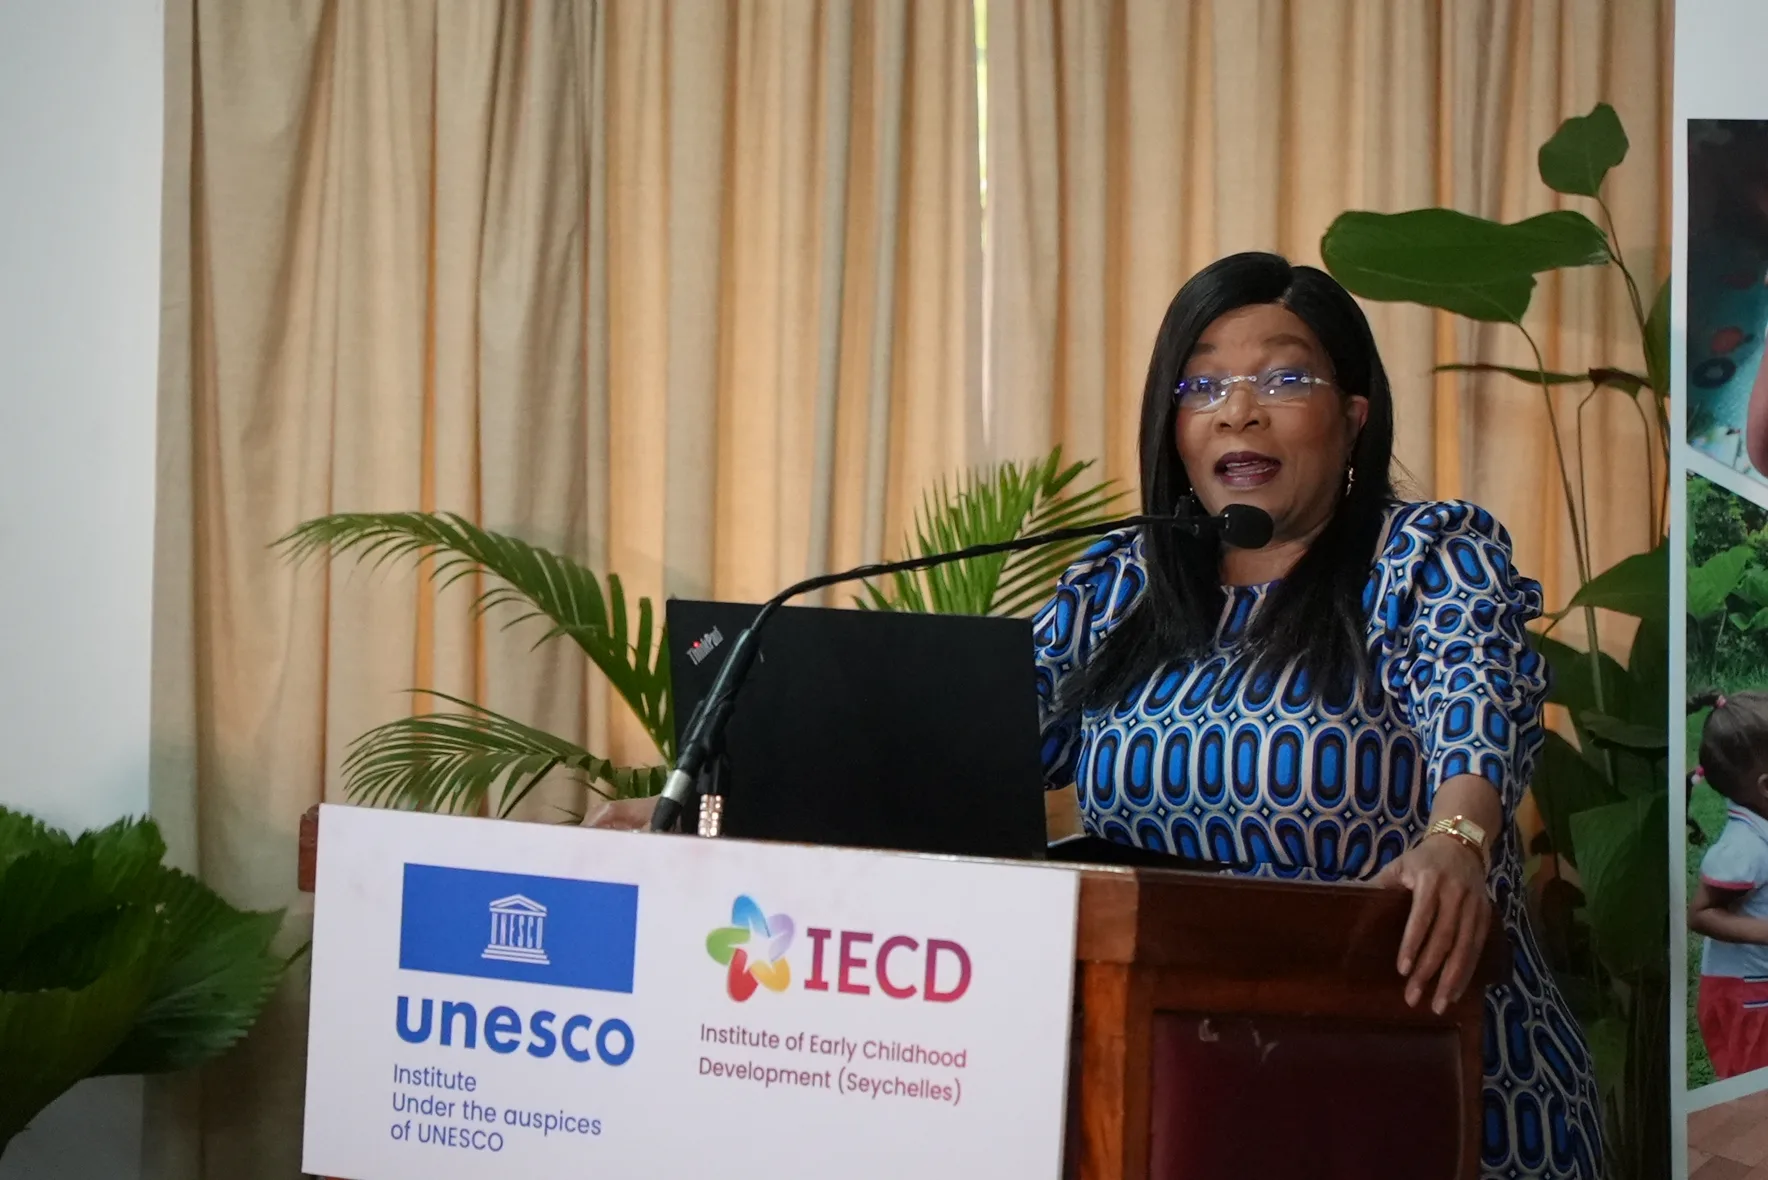 Chairperson envisions the IECD as a “laboratory of ideas”